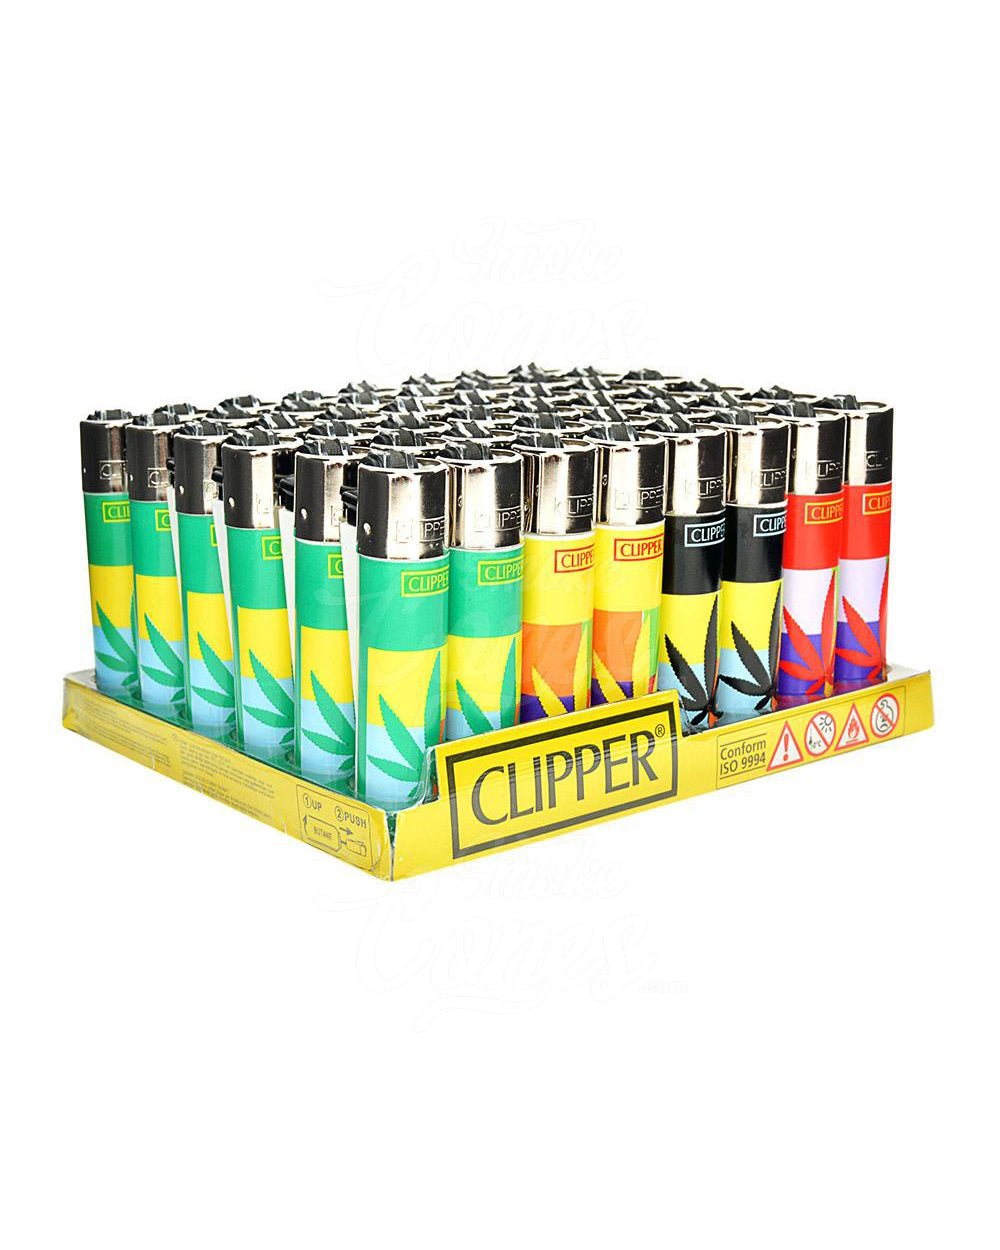 Clipper Lighters - Leaves 16 - Set of 4 Lighters - Refillable &  Re-flintable - Includes Display Case/Protective Holder - 99 Problems/420  Solutions